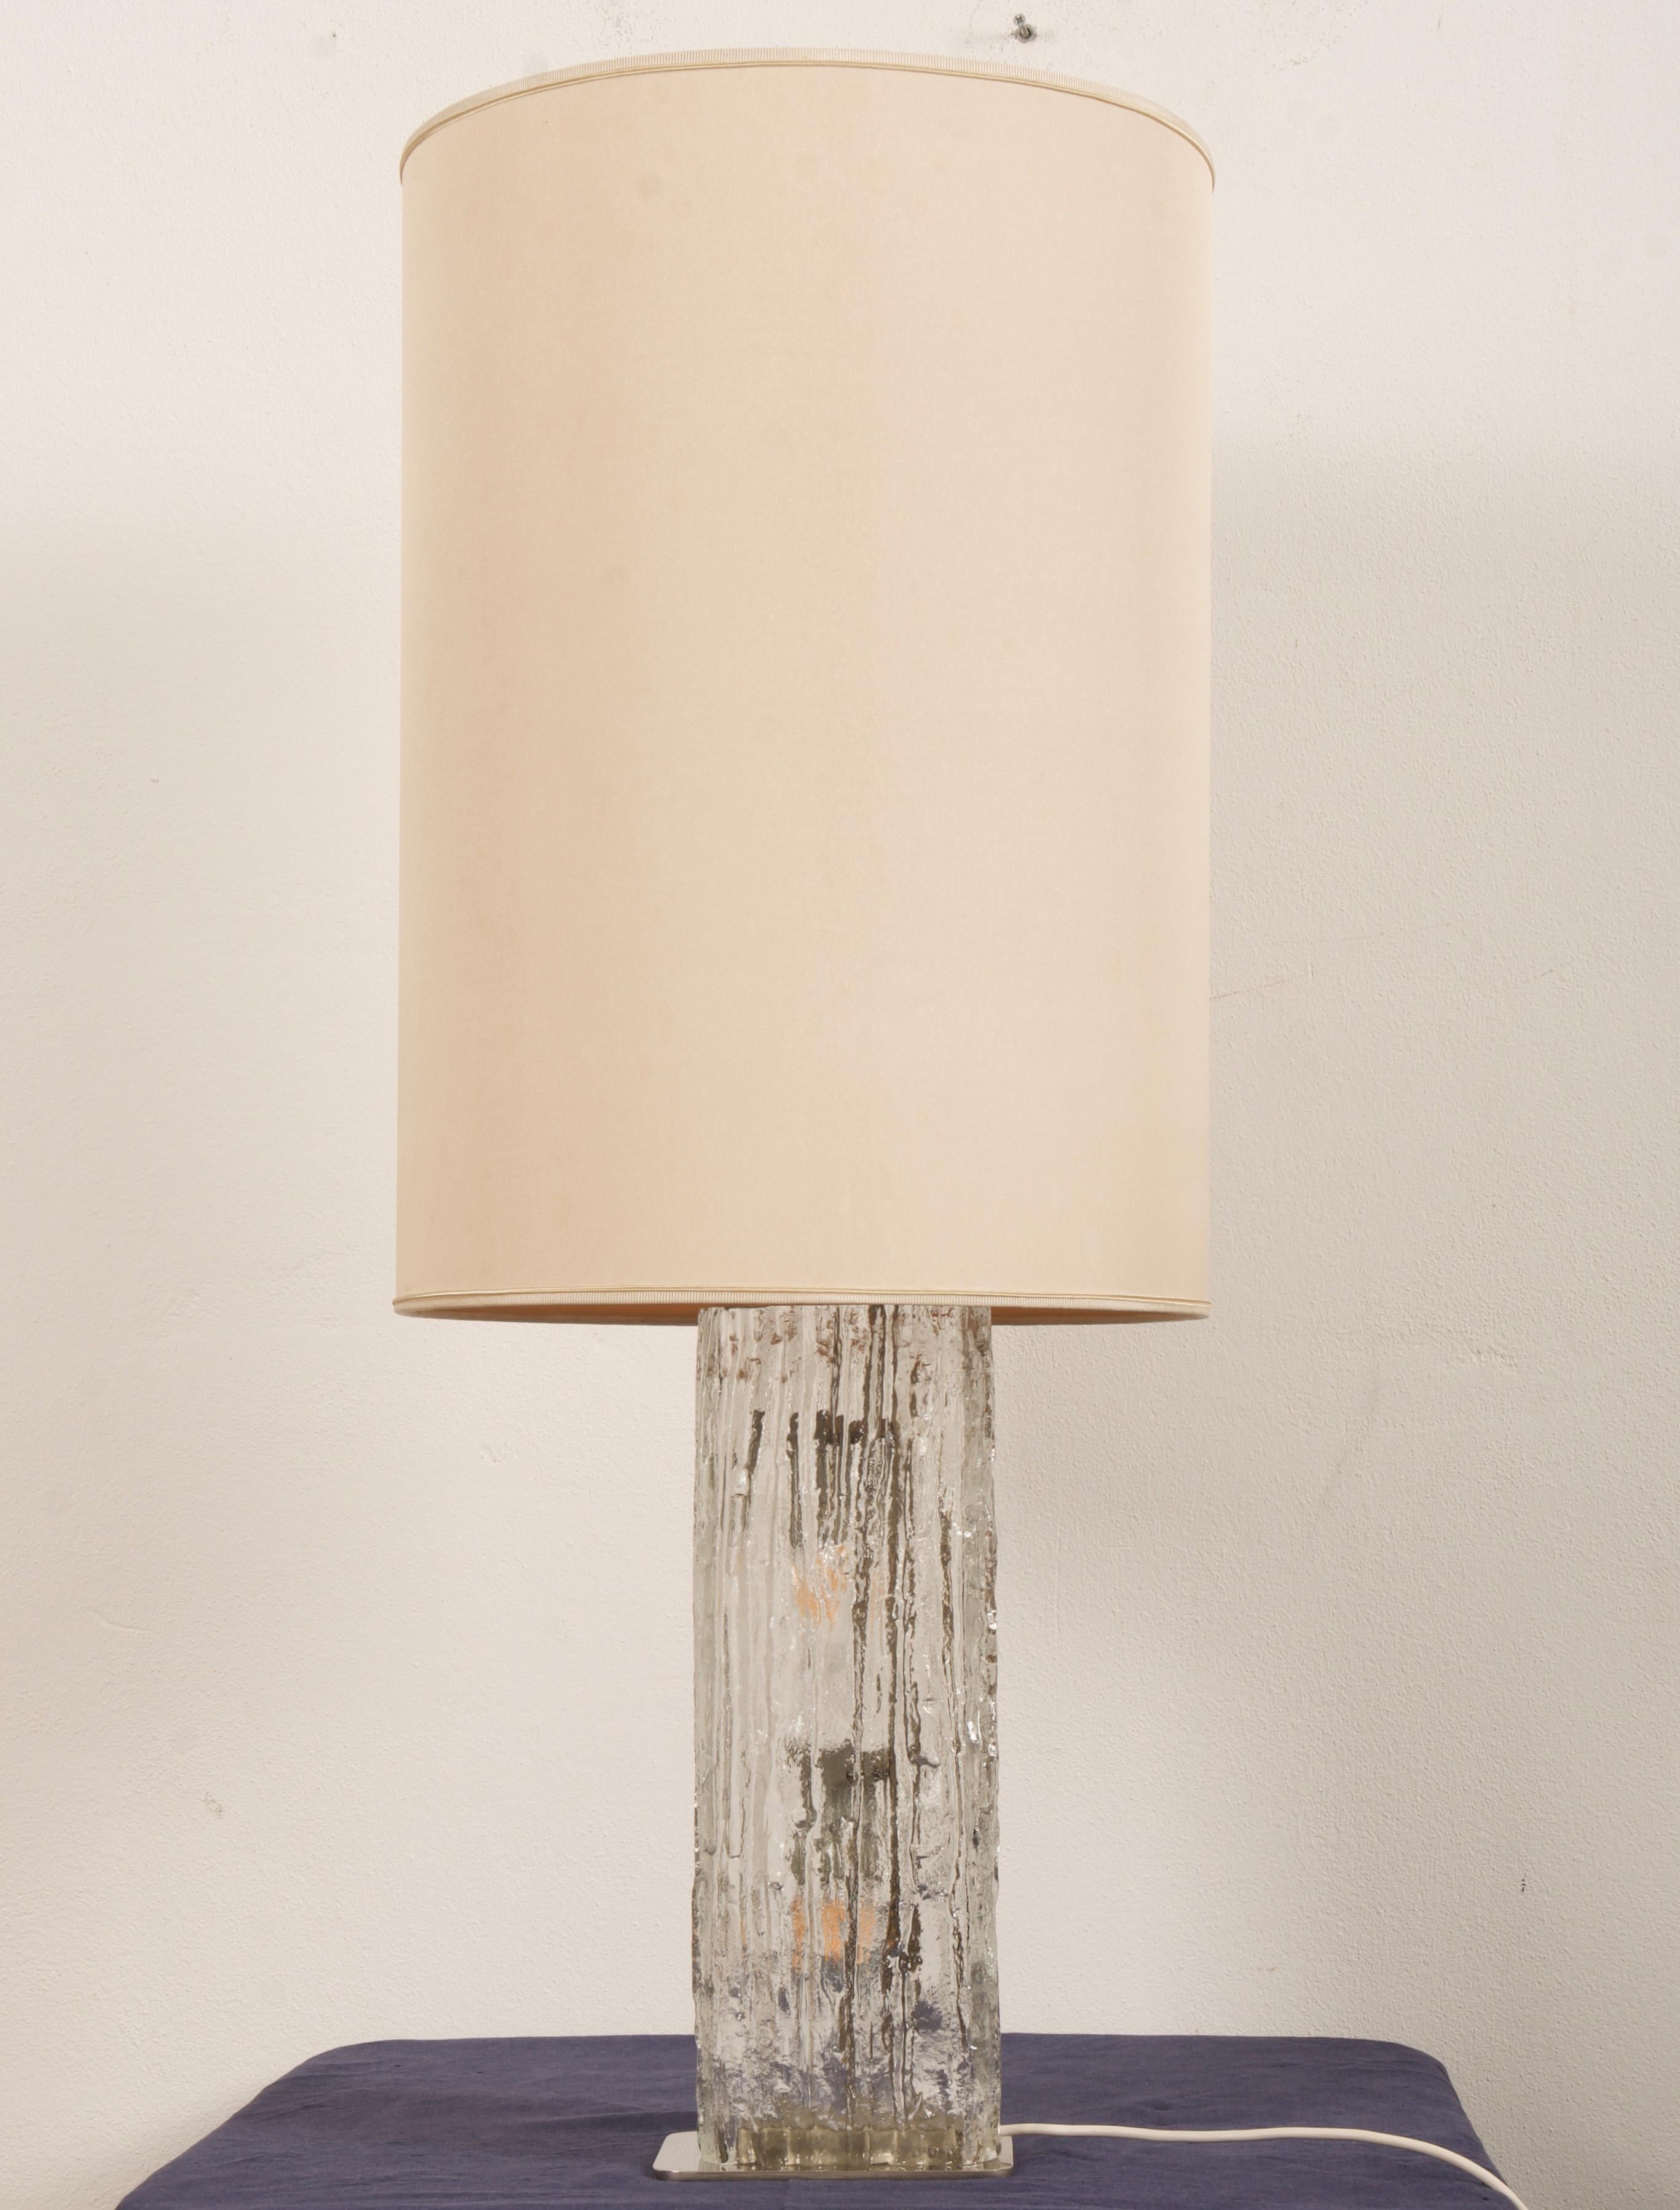 Mid-Century Modern Table Lamp by Kalmar Frankenberg with an Illuminated Ice Glass Stand For Sale